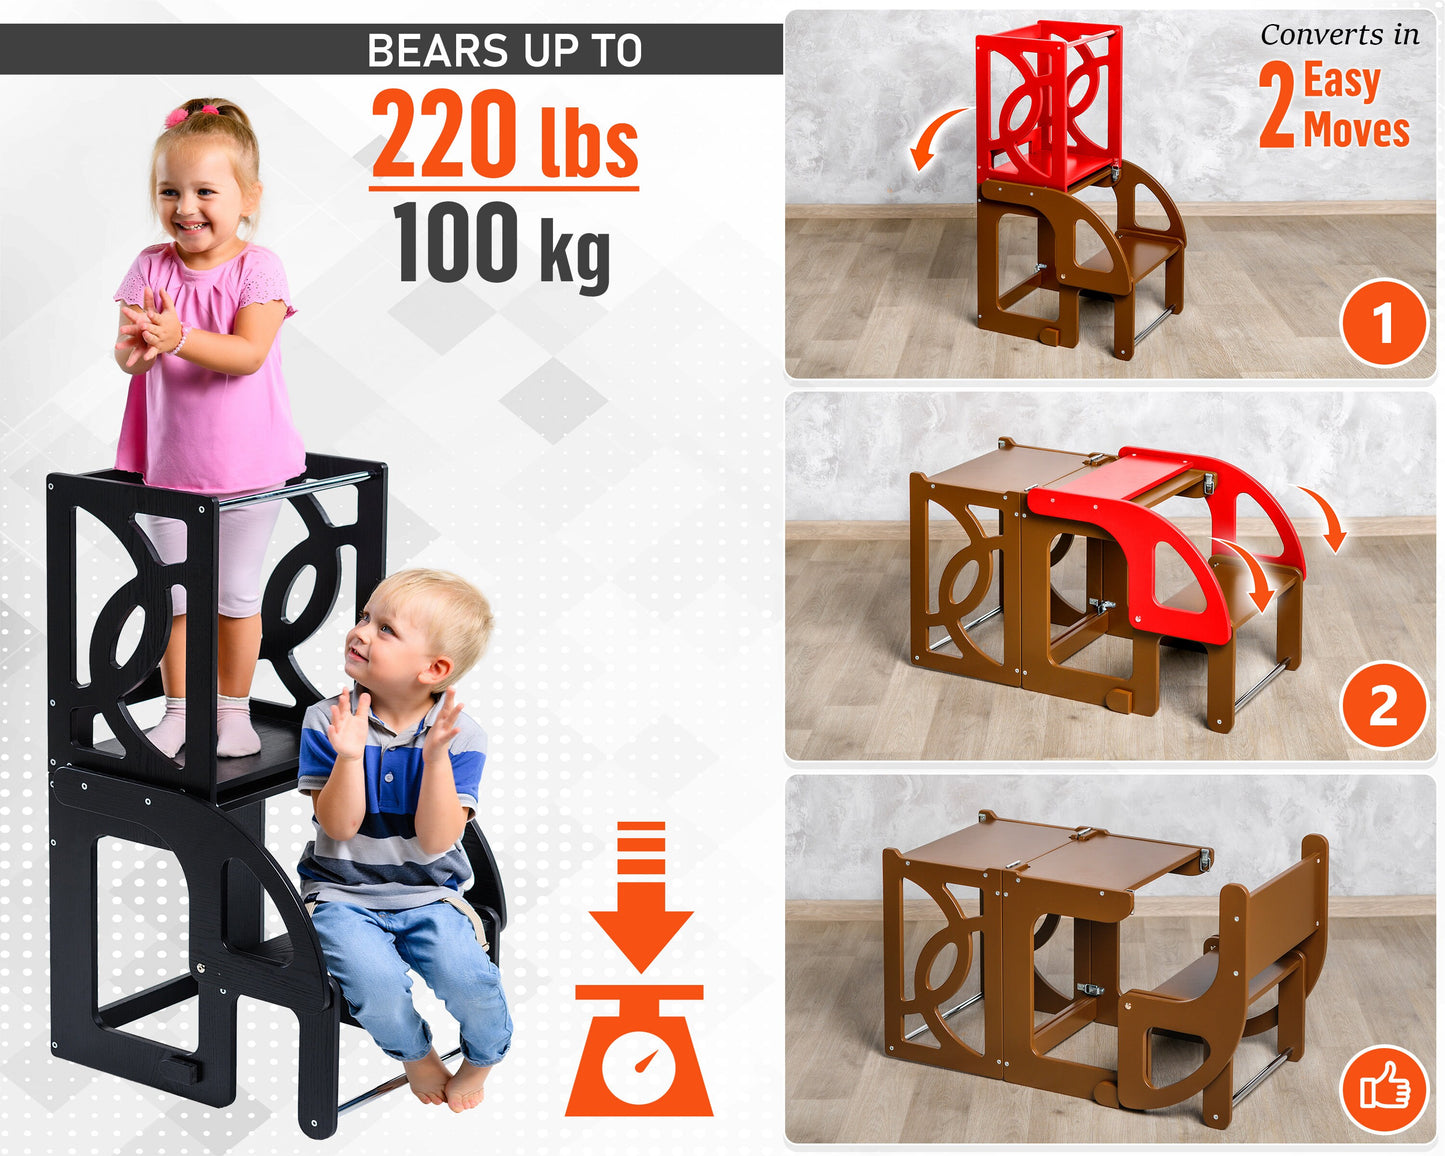 Black Step stool with back Learning toddler tower Kitchen helper stool Wooden step stool Kitchen stool Toddler tower Montessori stool